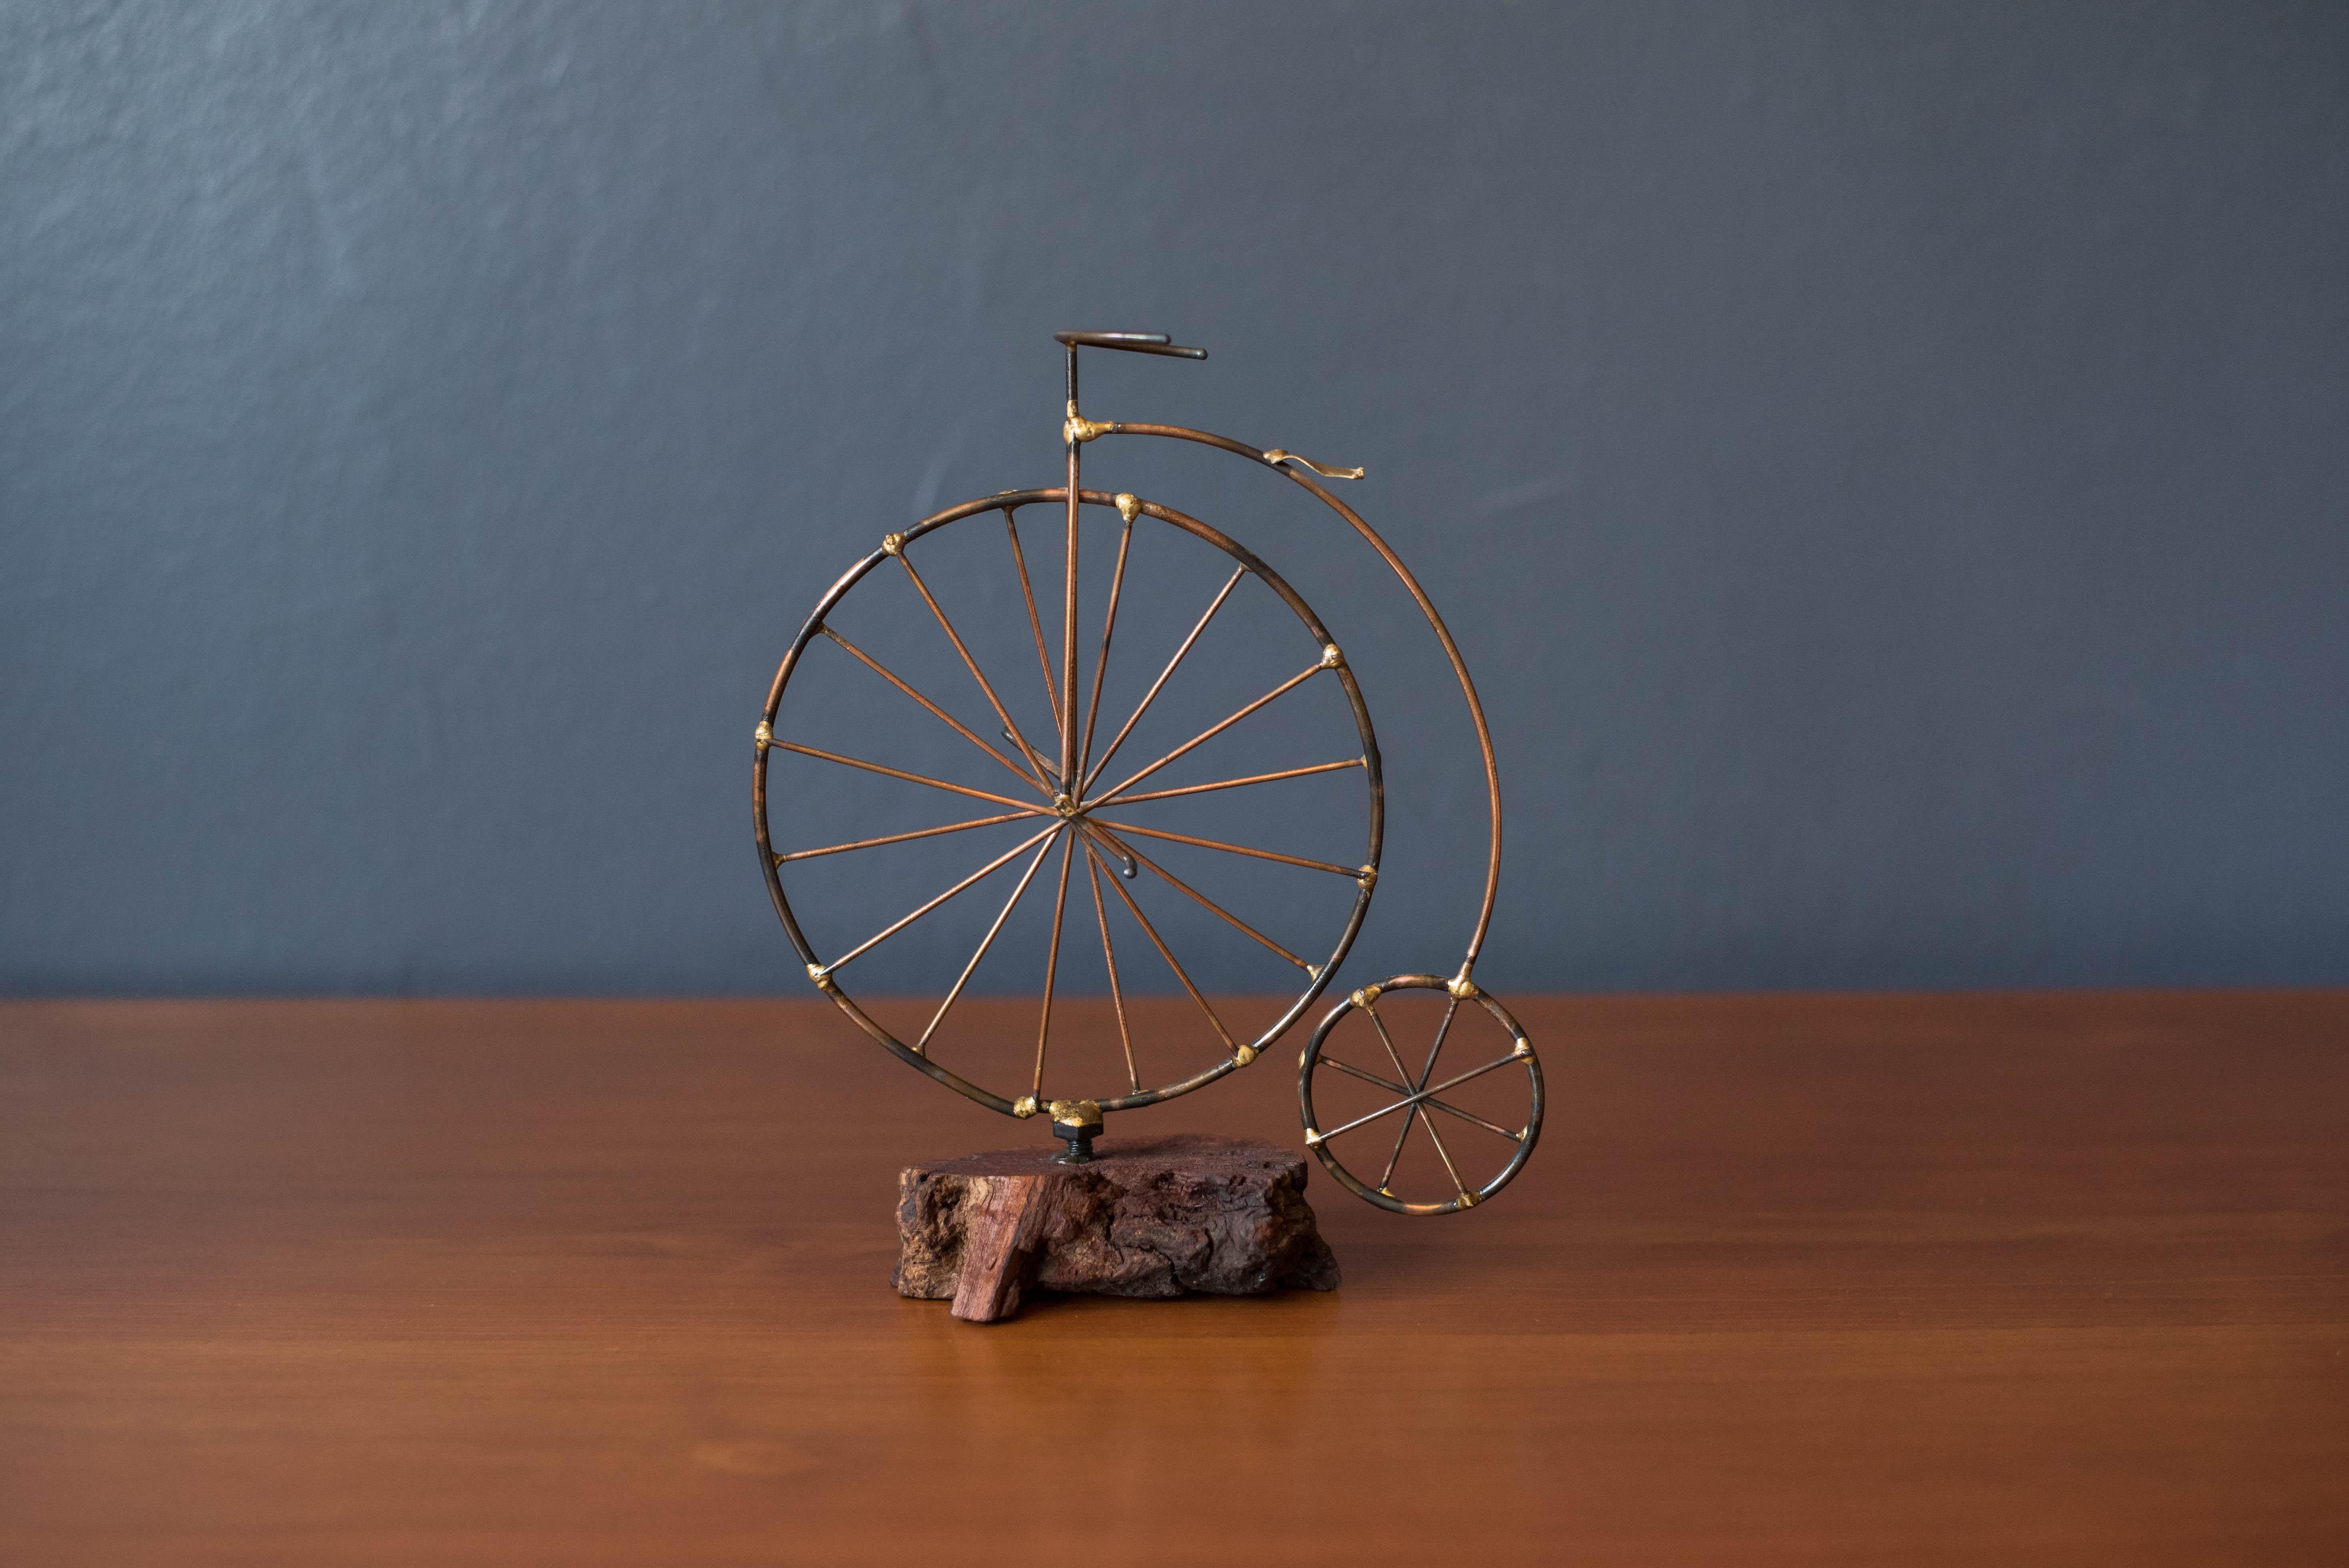 Mid-Century Modern studio art high wheeler bicycle sculpture circa 1970's. This piece is crafted of mixed metals mounted on a free form burl wood base. The perfect accent tabletop or desktop piece to complement mid century and industrial modern